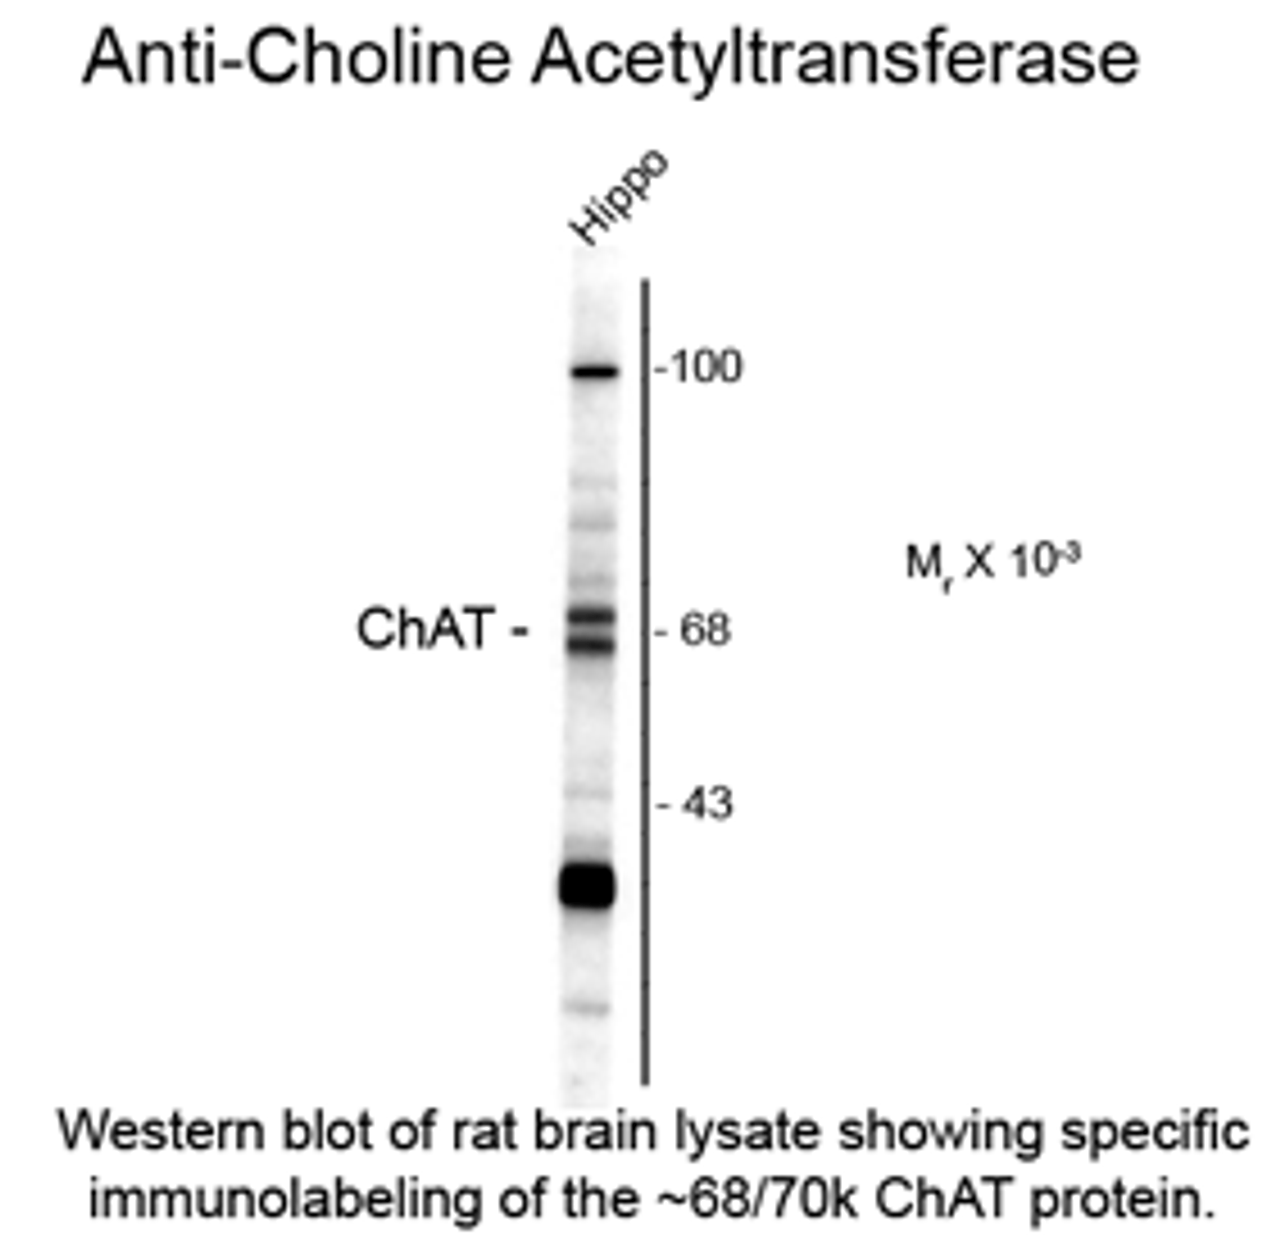 Western blot of rat brain lysate showing specific immunolabeling of the ~68/70k ChAT protein.